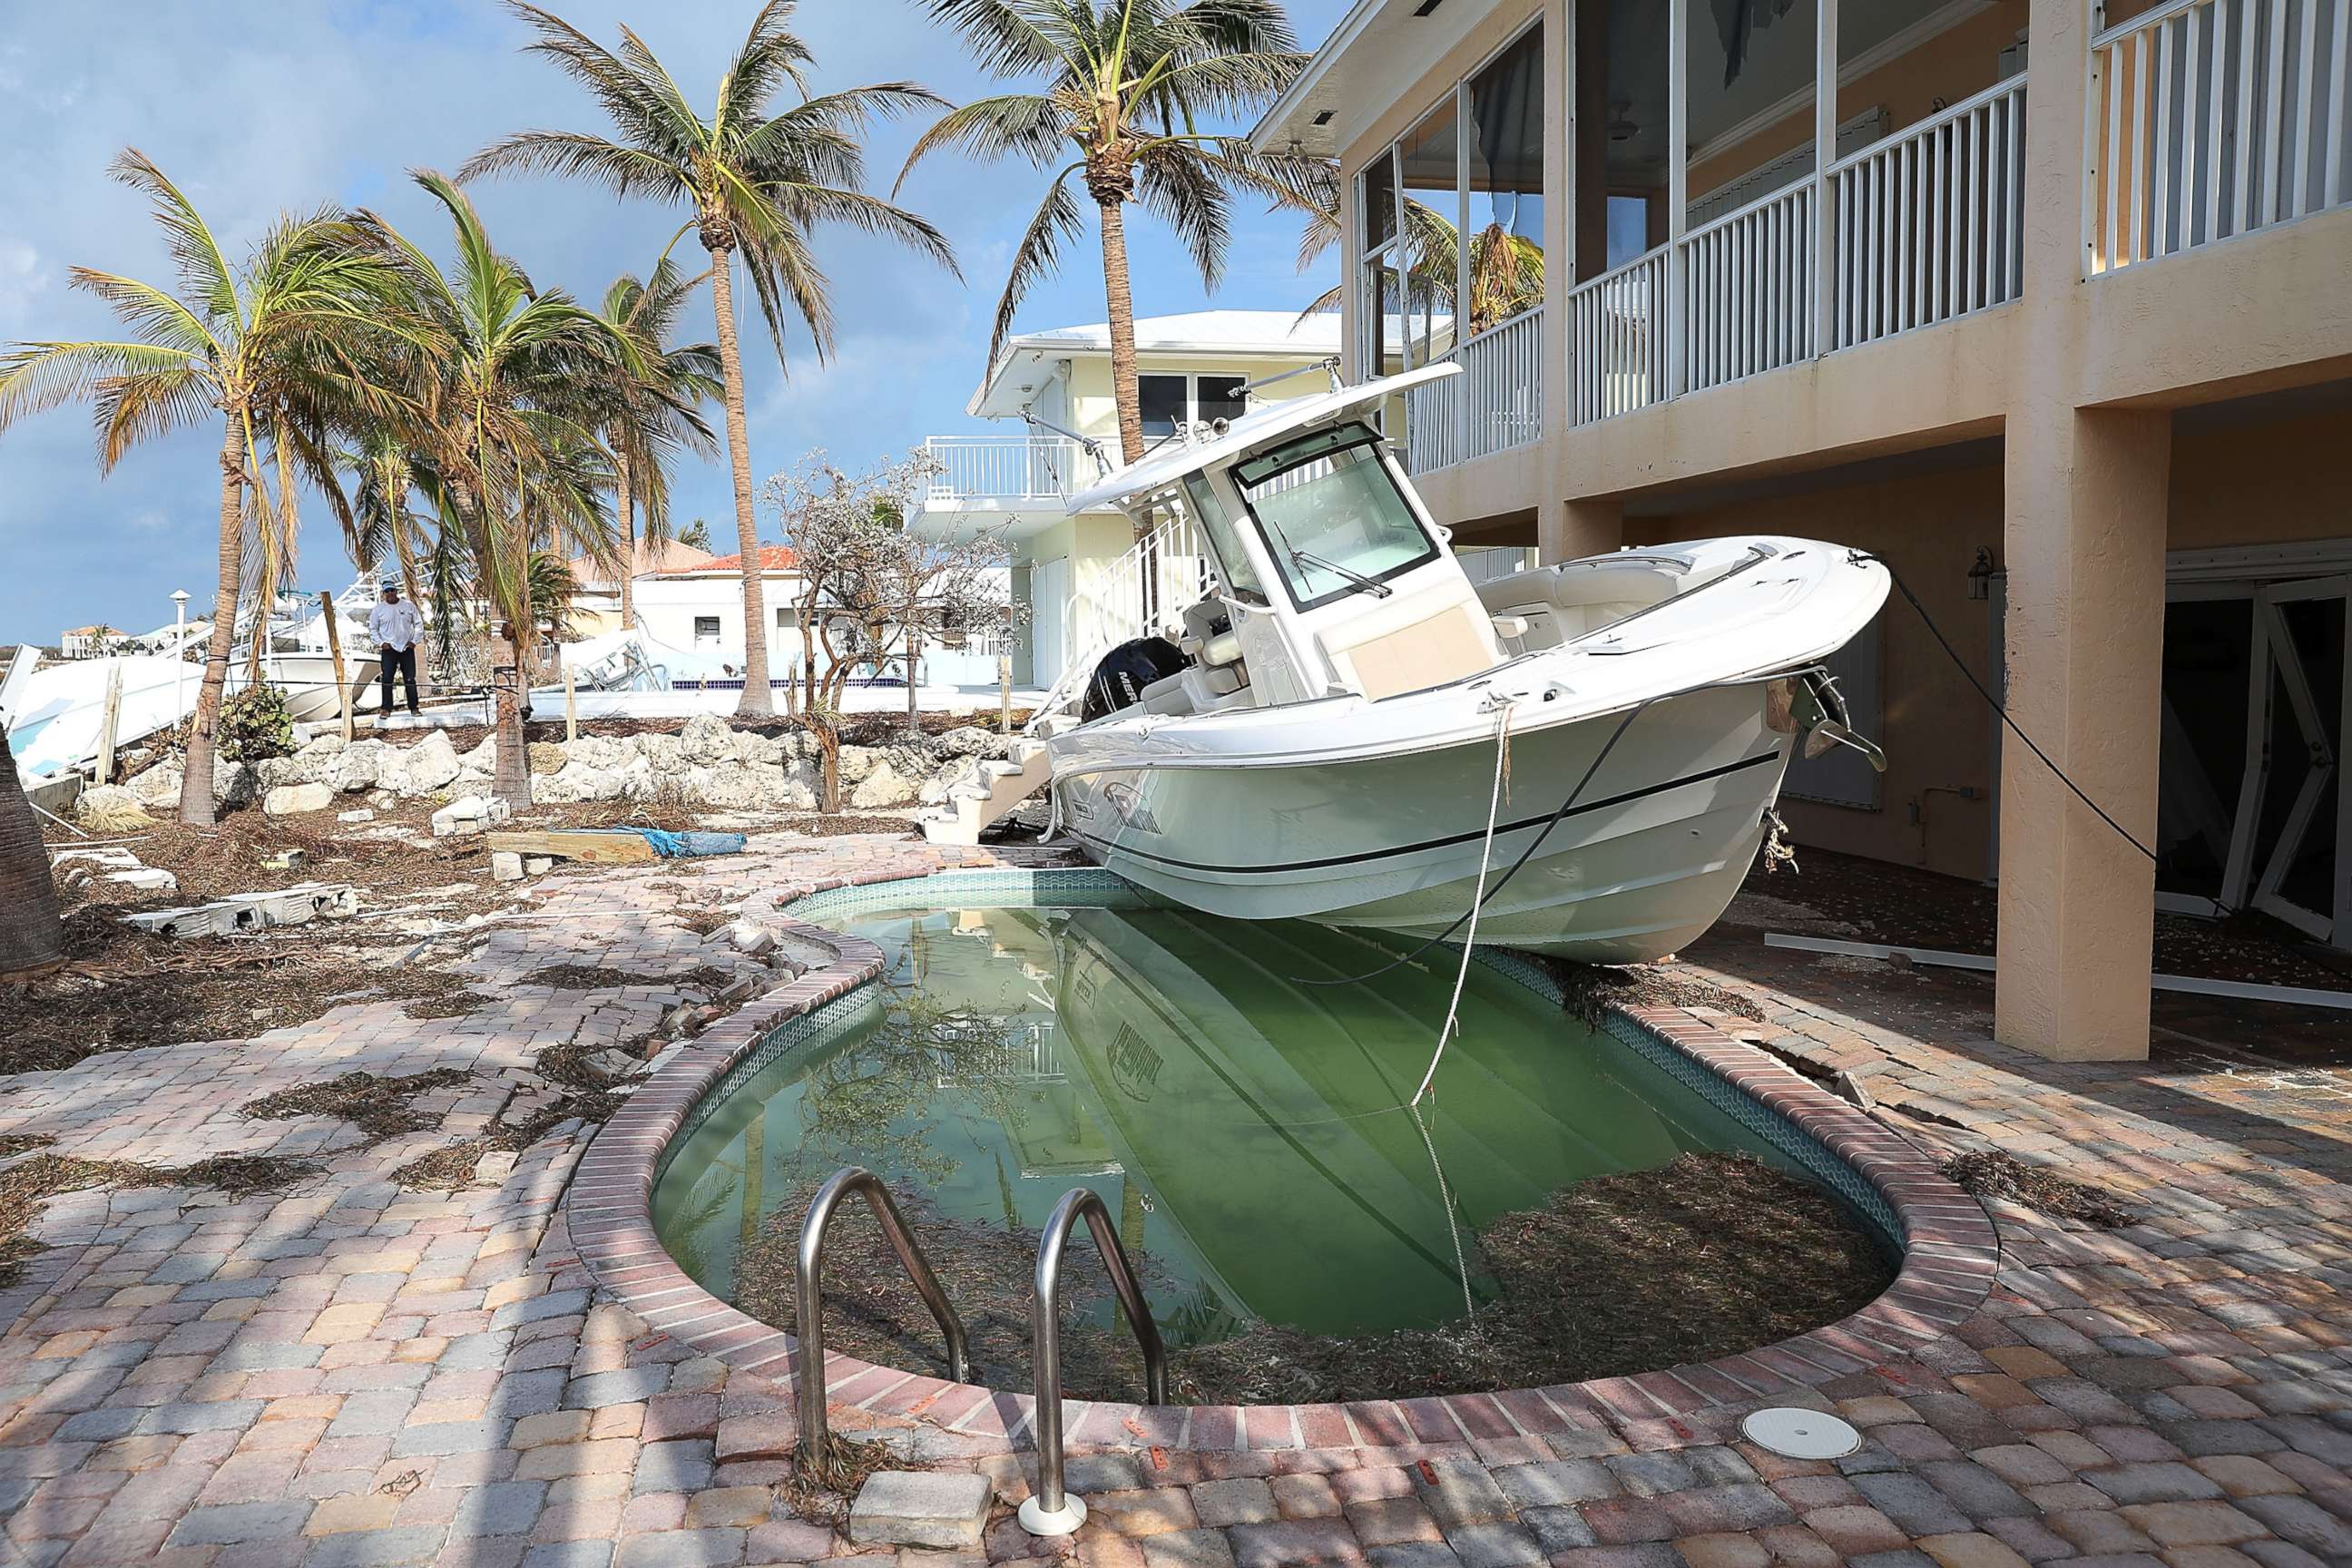 PHOTO: A boat is seen next to a home after Hurricane Irma passed through the area, Sept. 13, 2017, in Duck Key, Florida.